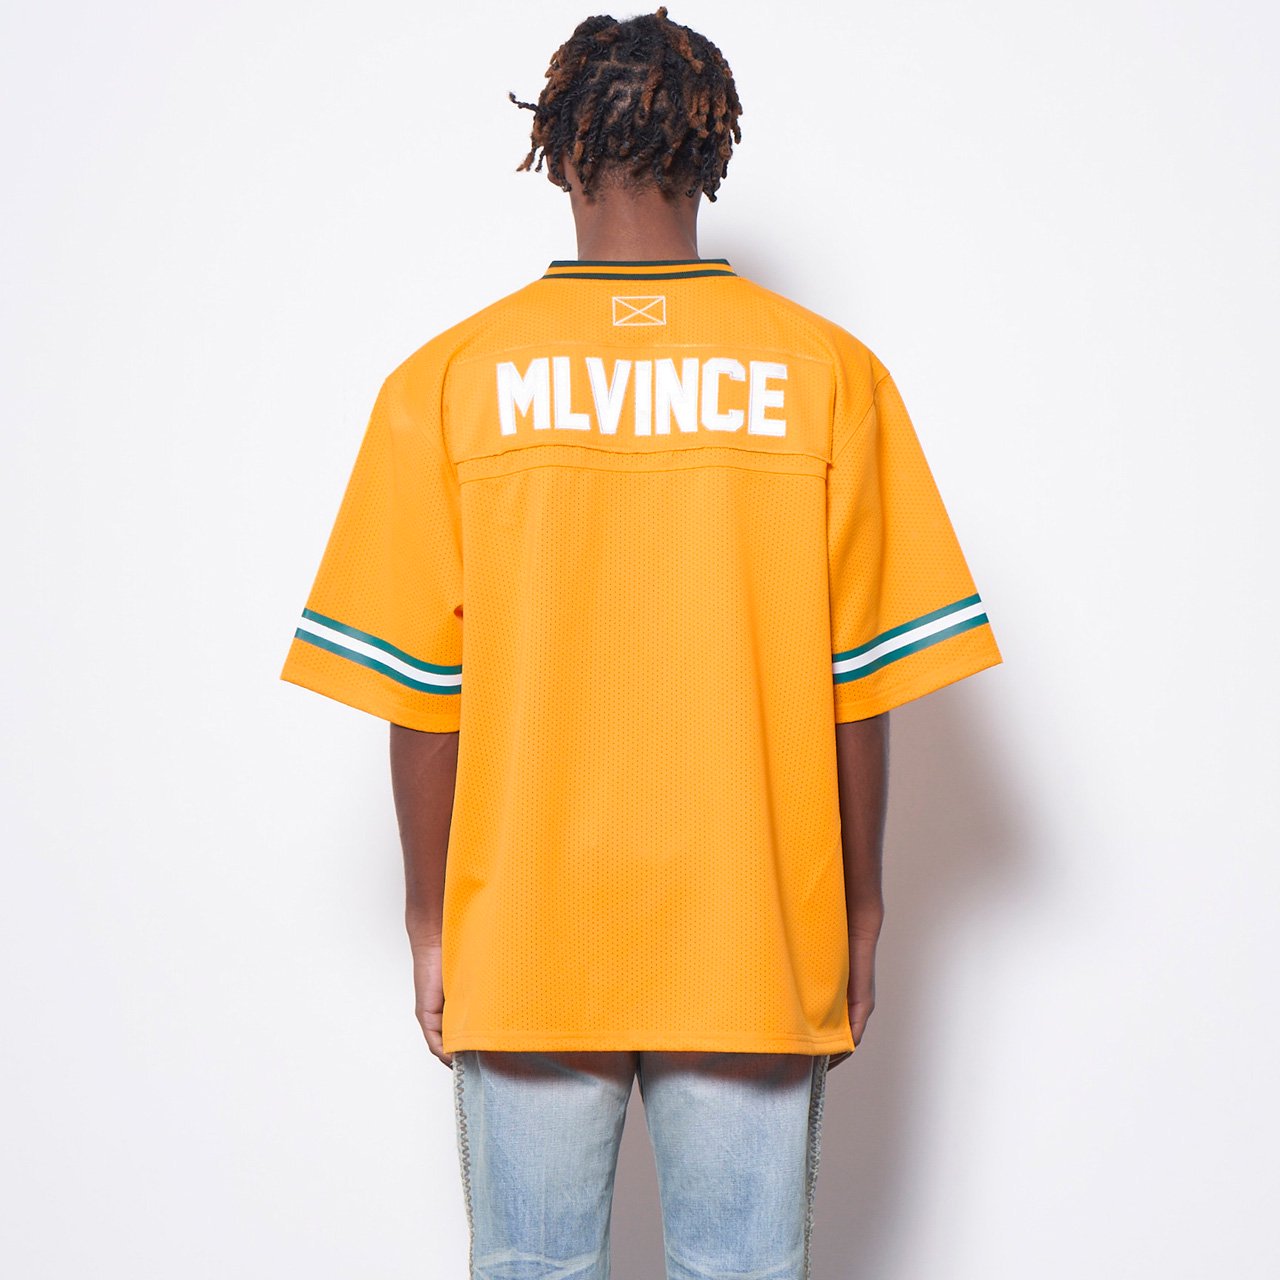 <img class='new_mark_img1' src='https://img.shop-pro.jp/img/new/icons5.gif' style='border:none;display:inline;margin:0px;padding:0px;width:auto;' />MLVINCE () | S/S FOOTBALL SHIRT YELLOW